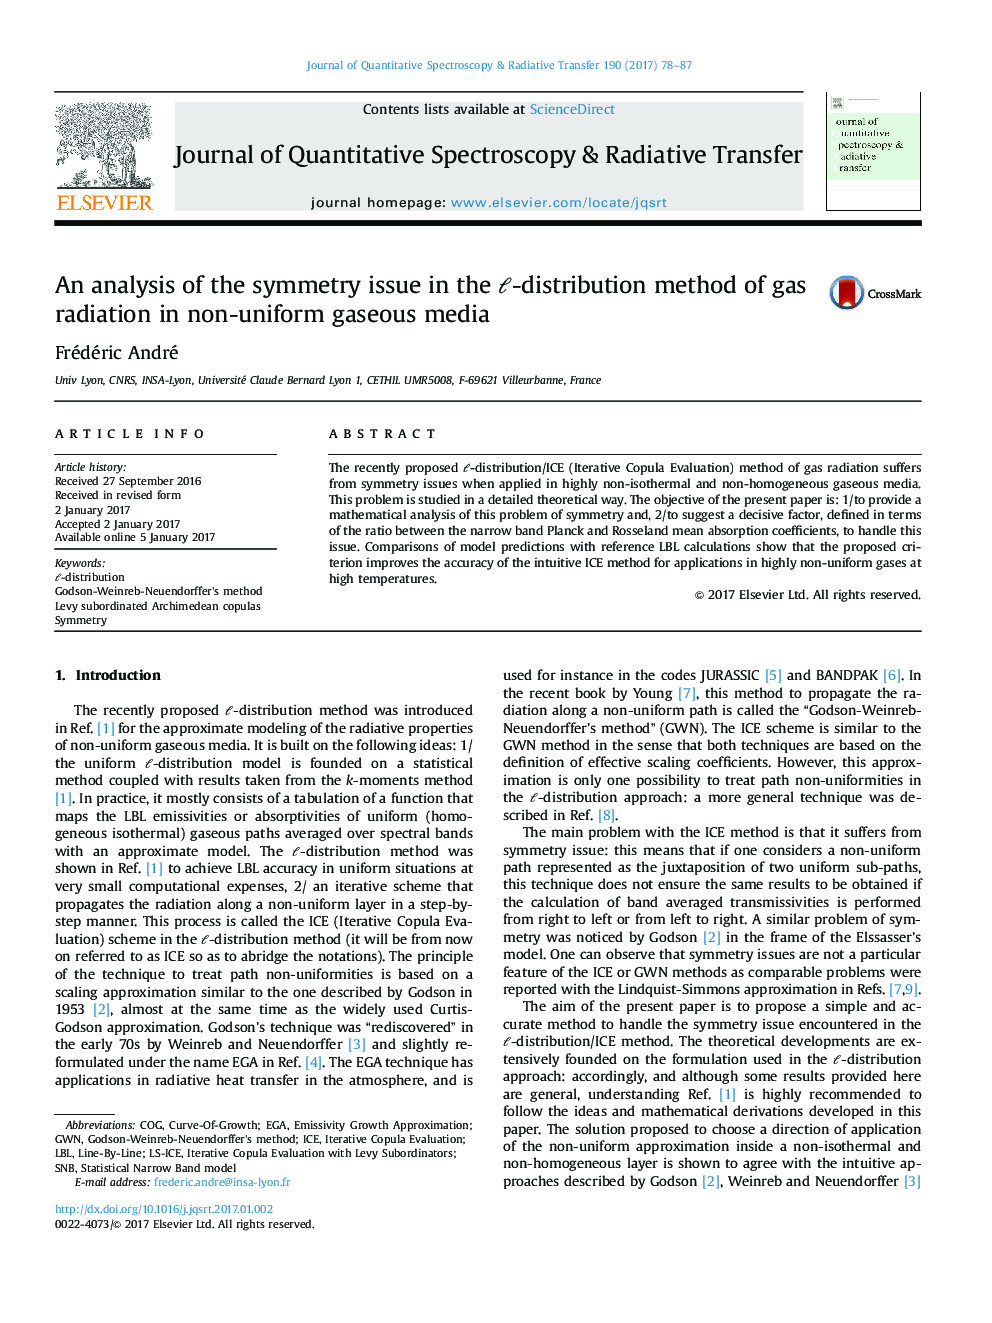 An analysis of the symmetry issue in the â-distribution method of gas radiation in non-uniform gaseous media